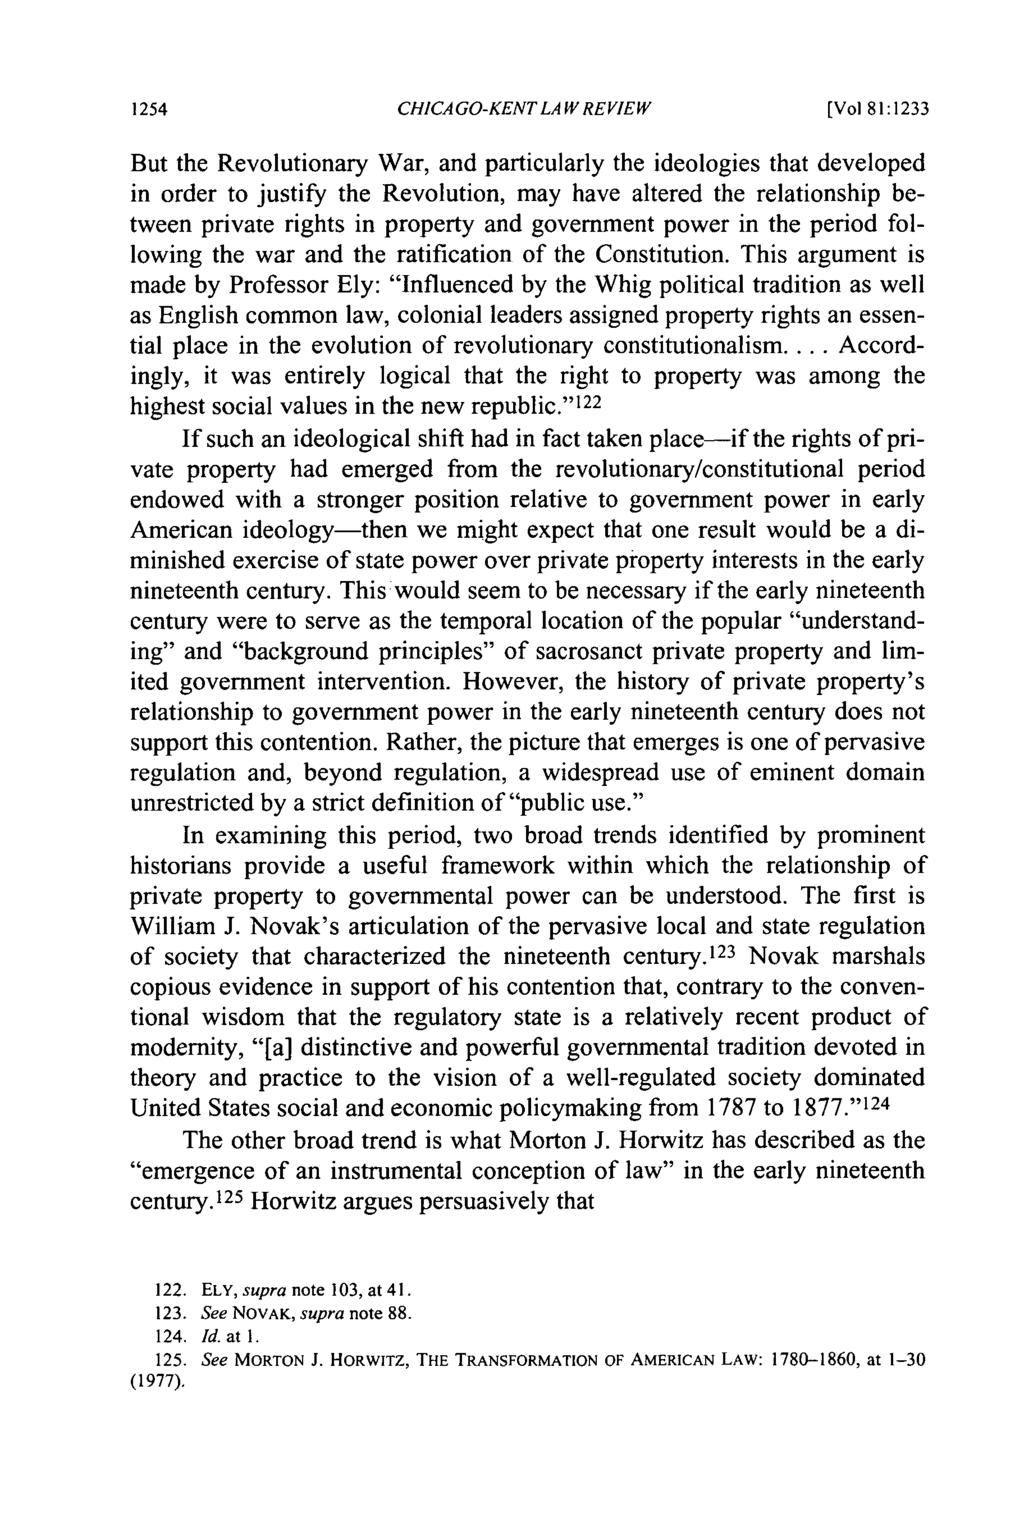 CHICAGO-KENT LAW REVIEW [Vol 81:1233 But the Revolutionary War, and particularly the ideologies that developed in order to justify the Revolution, may have altered the relationship between private